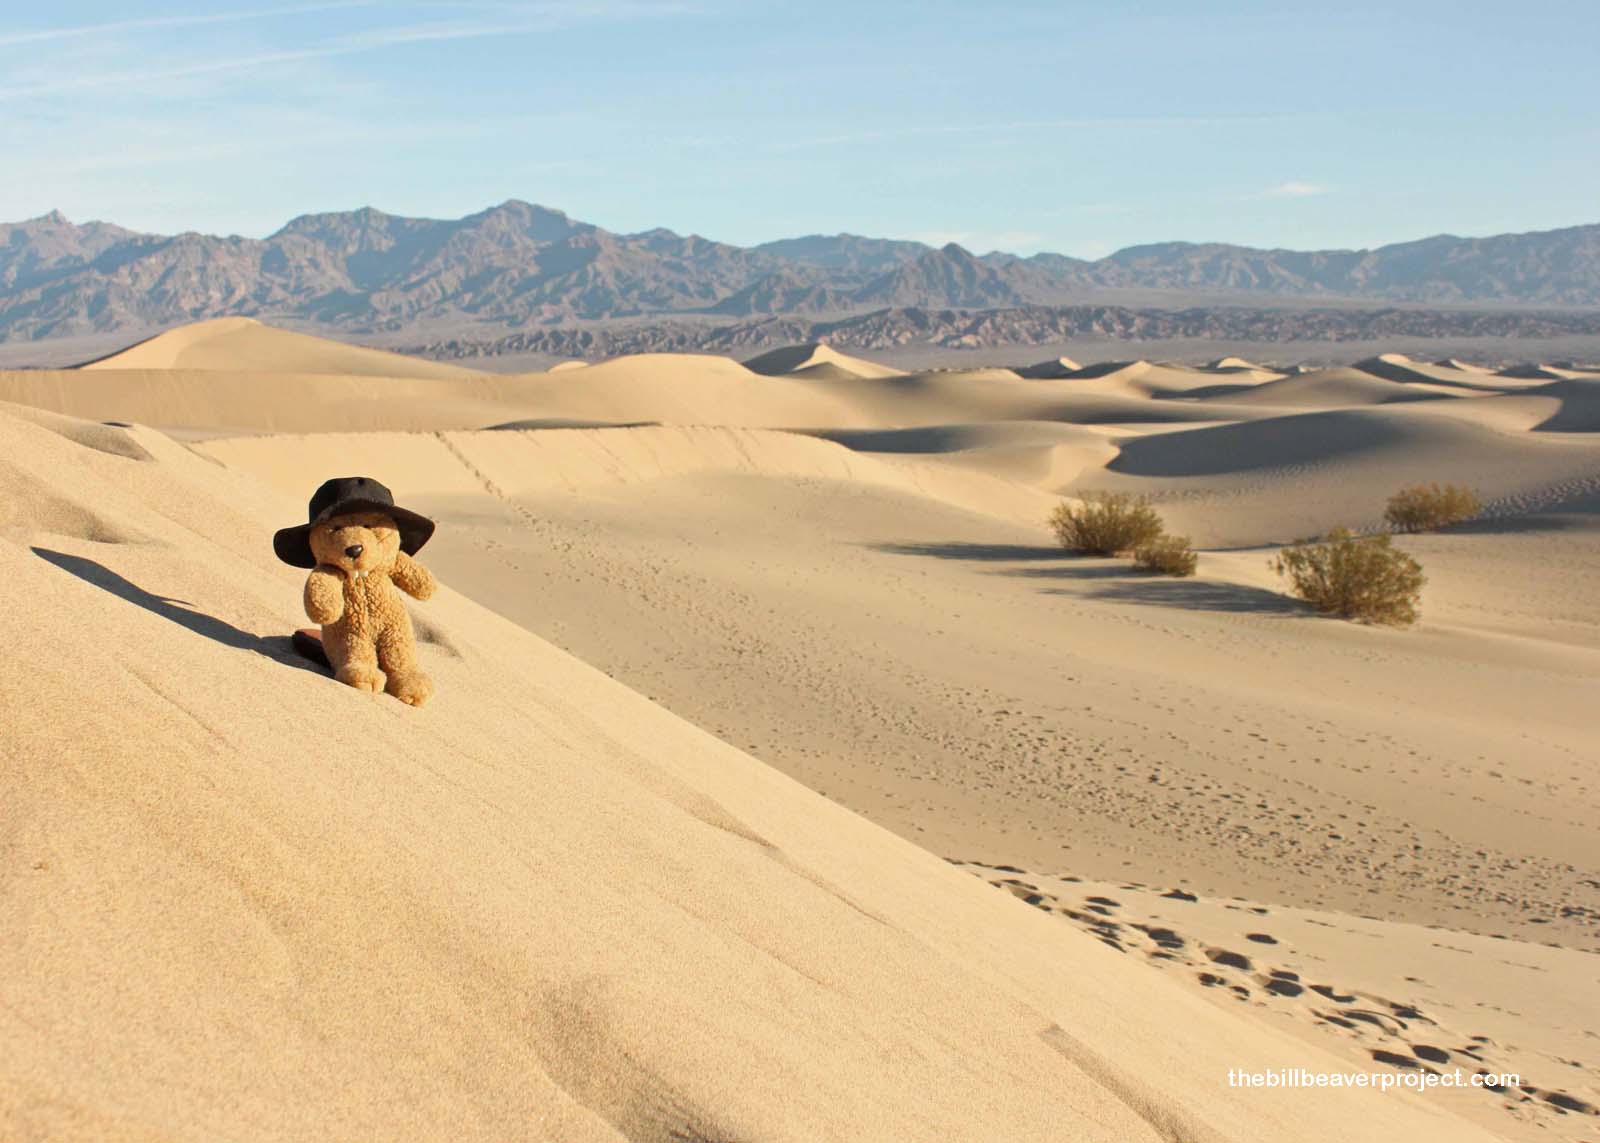 Lots of fun frolicking on the Mesquite Sand Dunes!